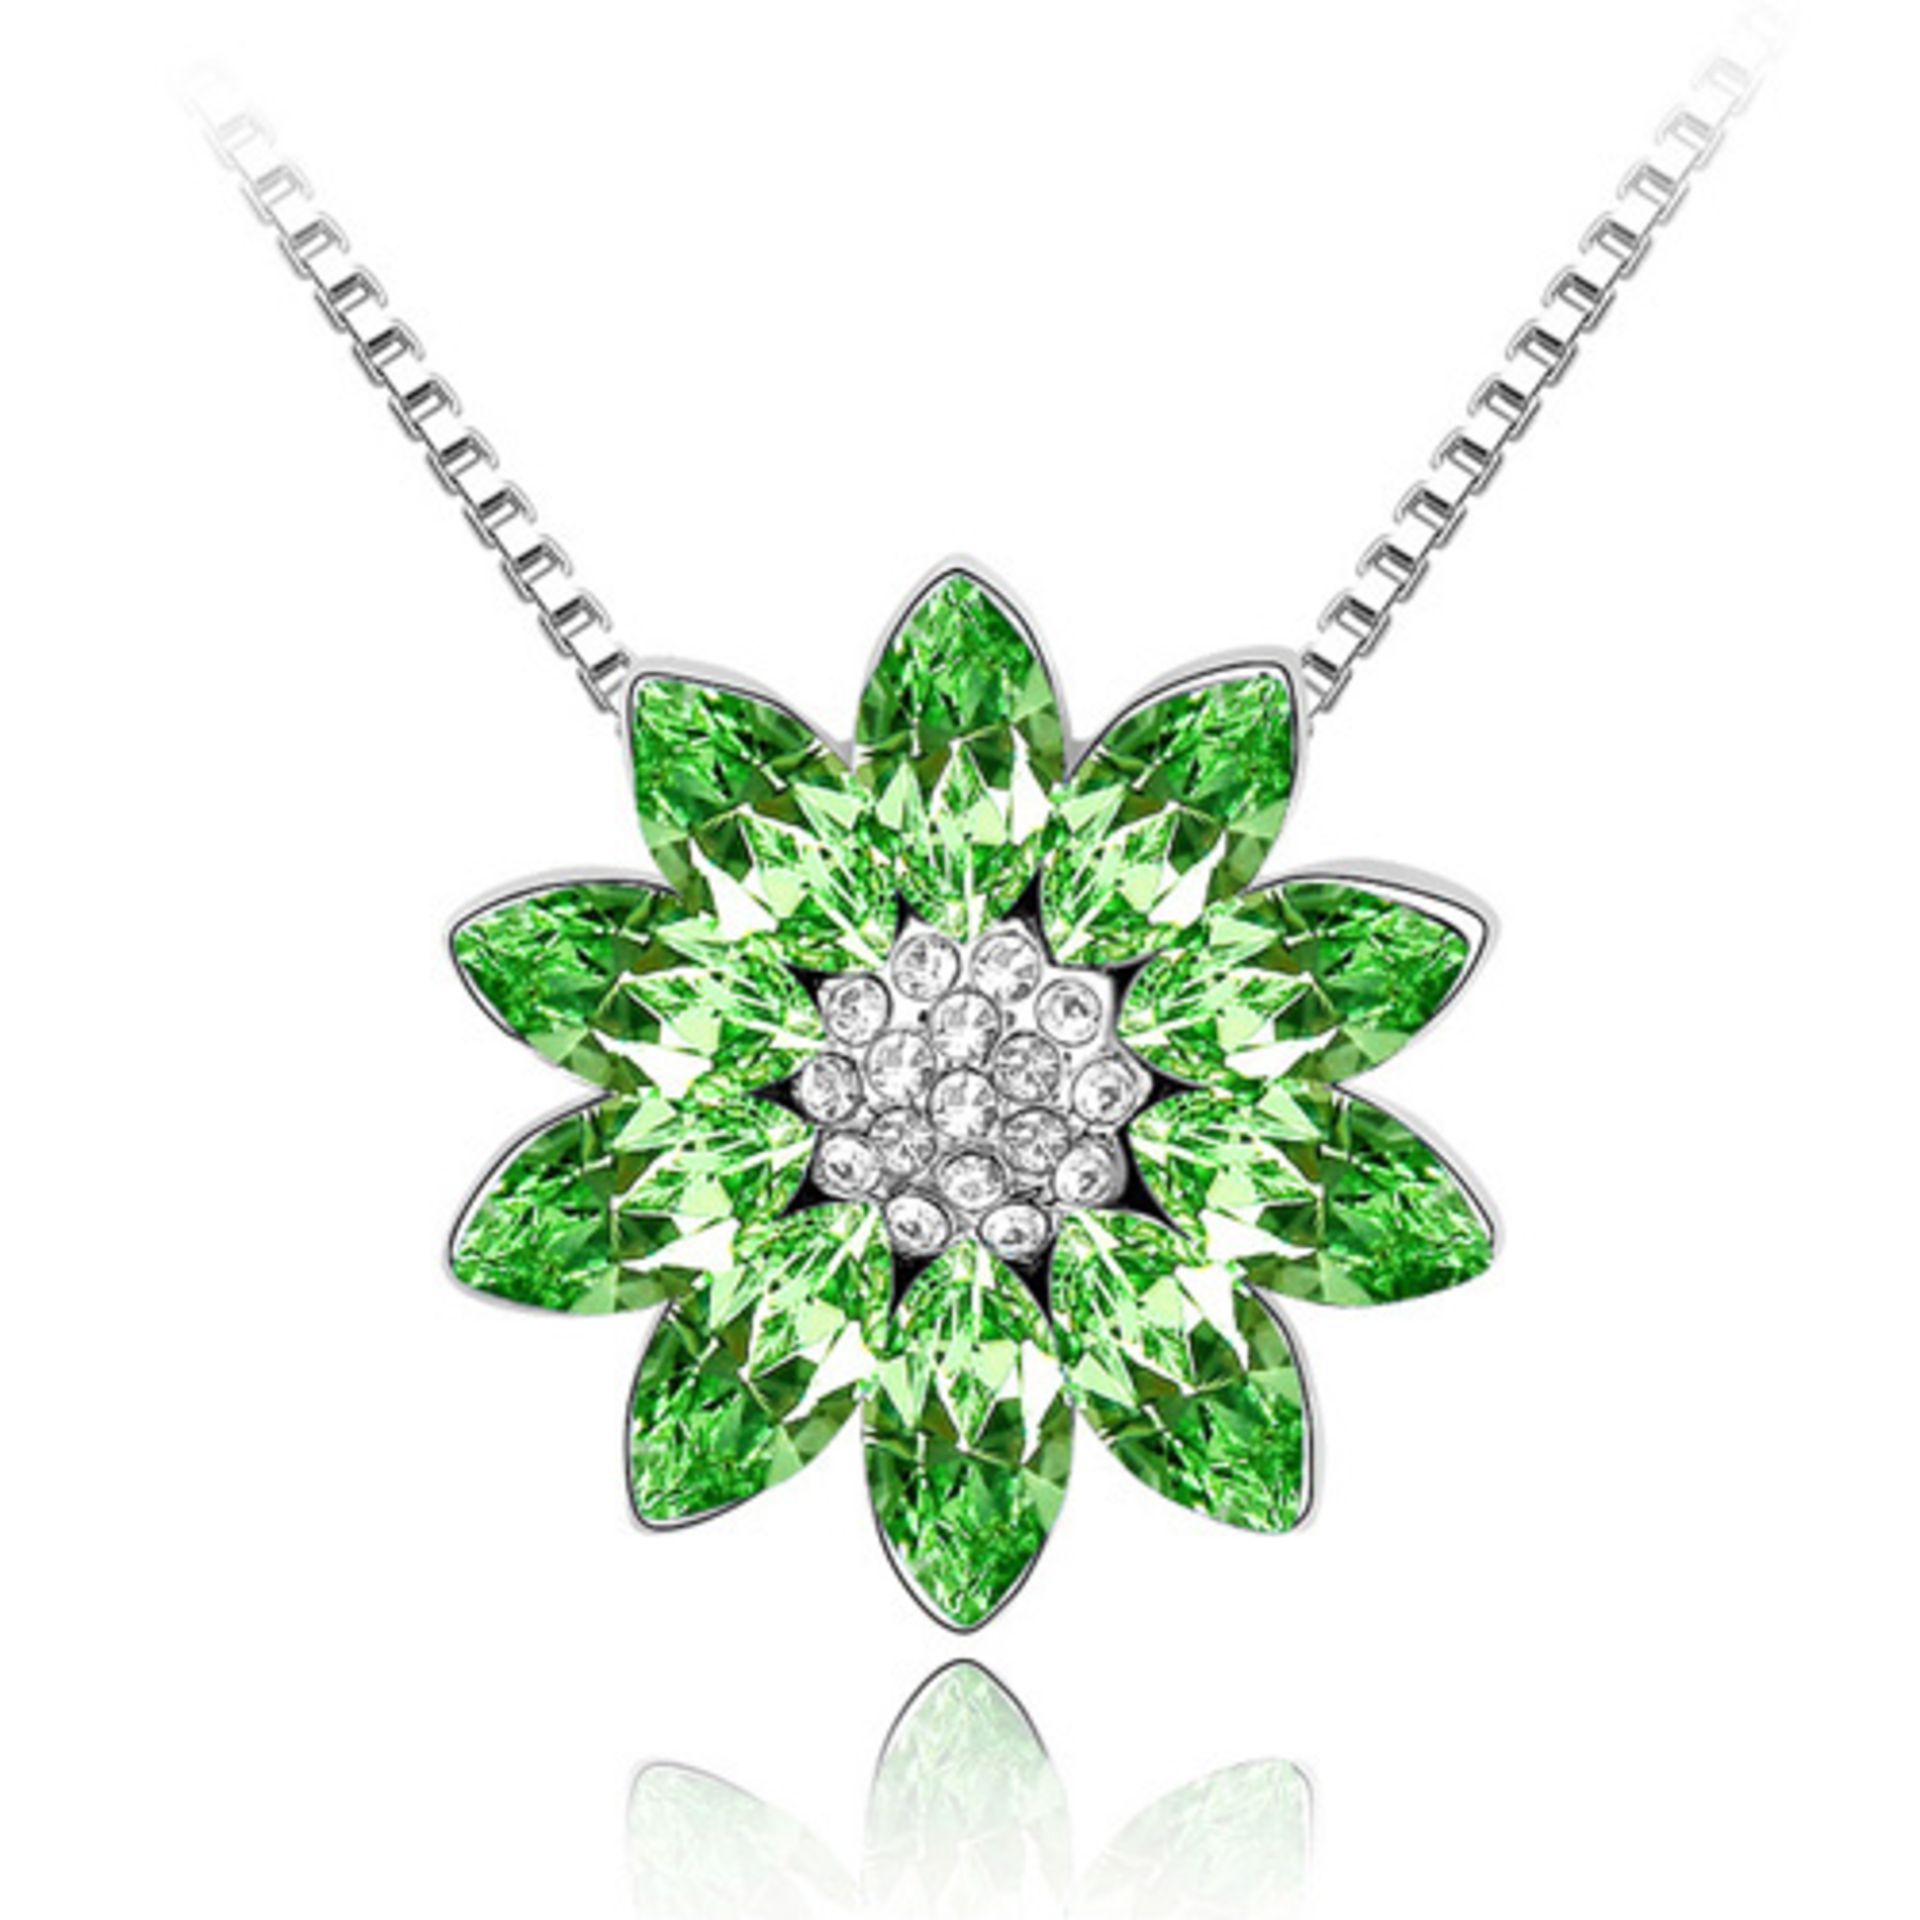 2x Absolutely Amazing Flower Shaped Swarovski Element Necklace, Really Stand Out With This Piece,